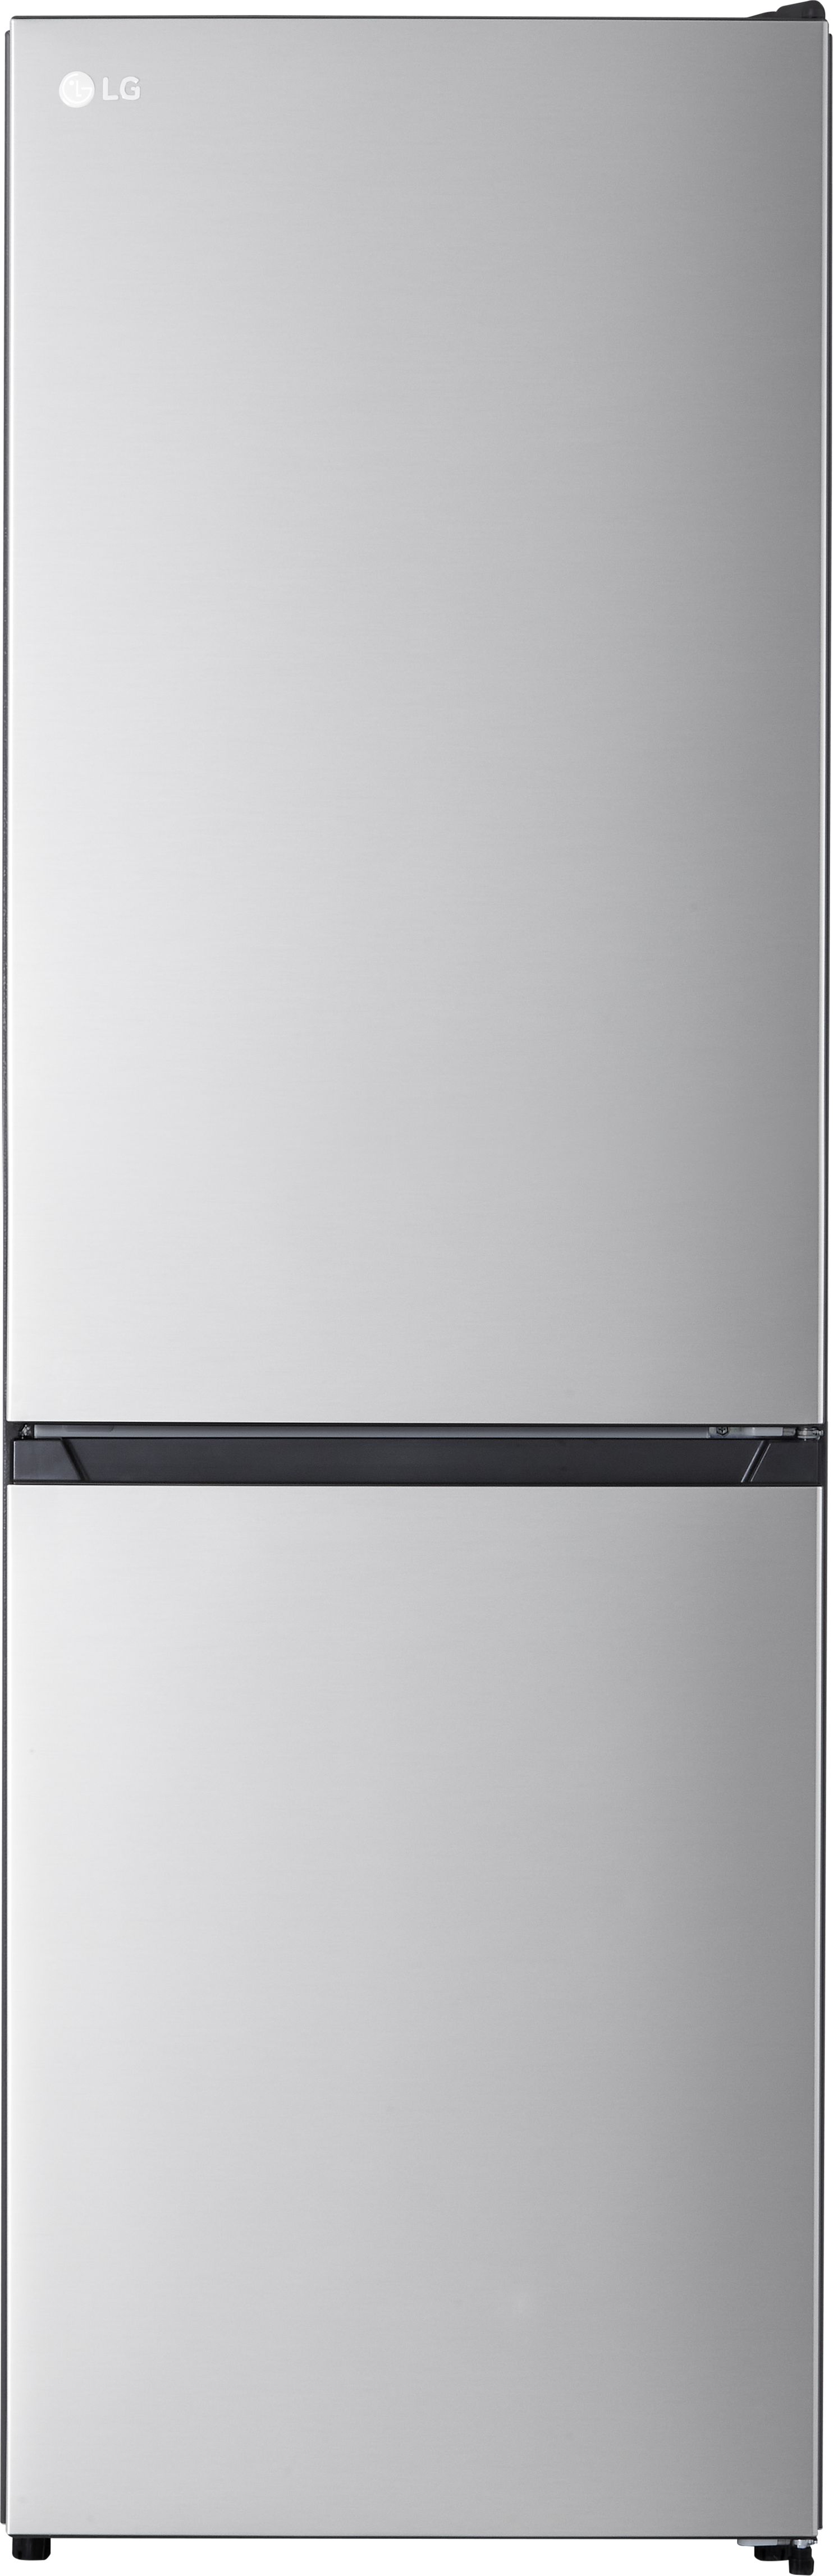 LG GBM21HSADH 60/40 No Frost Fridge Freezer - Silver - D Rated, Silver